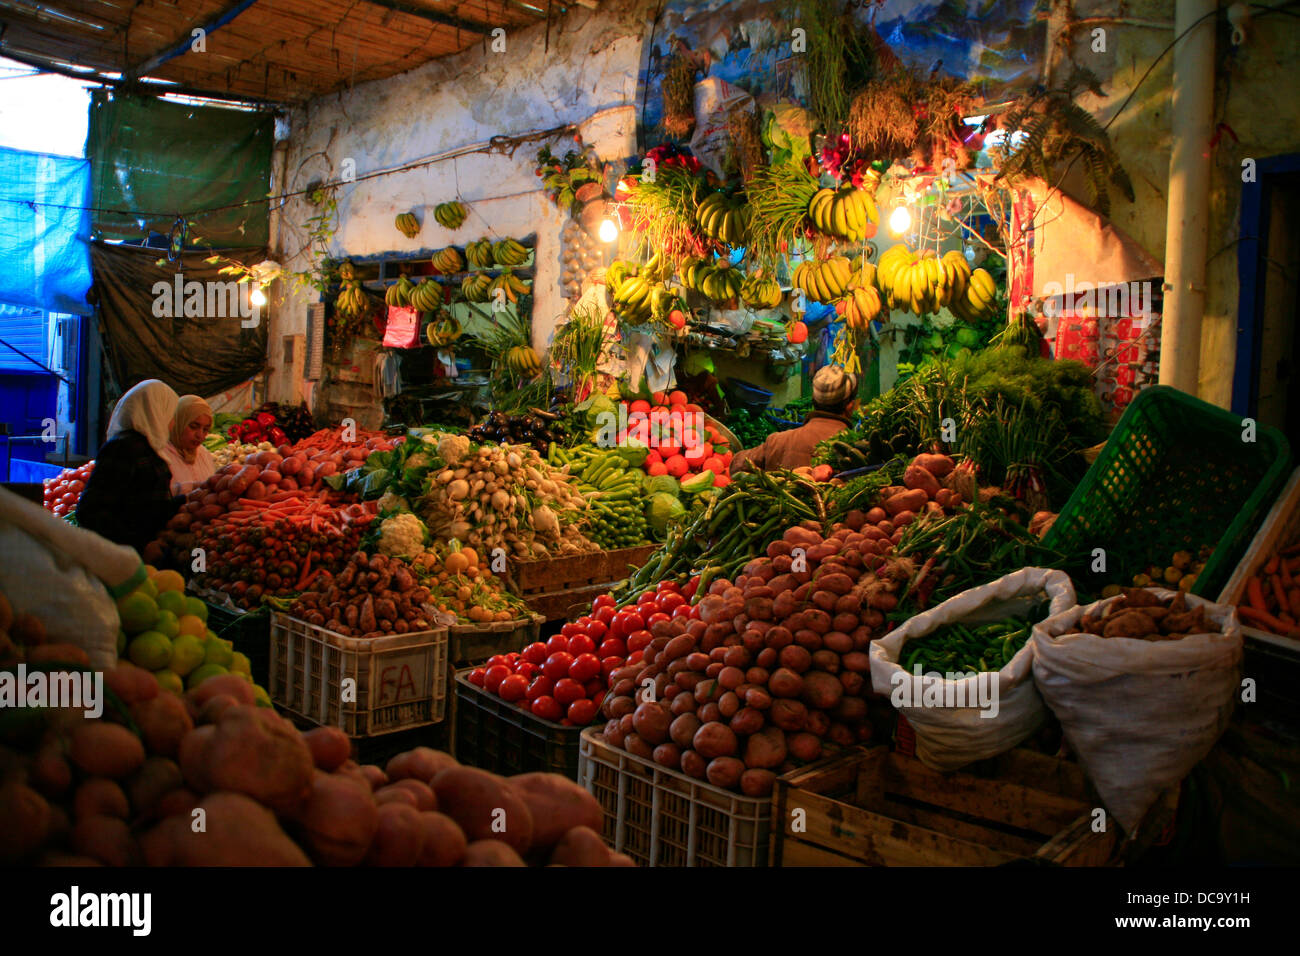 Marrakech fruit and vegetable stall in Market. Stock Photo